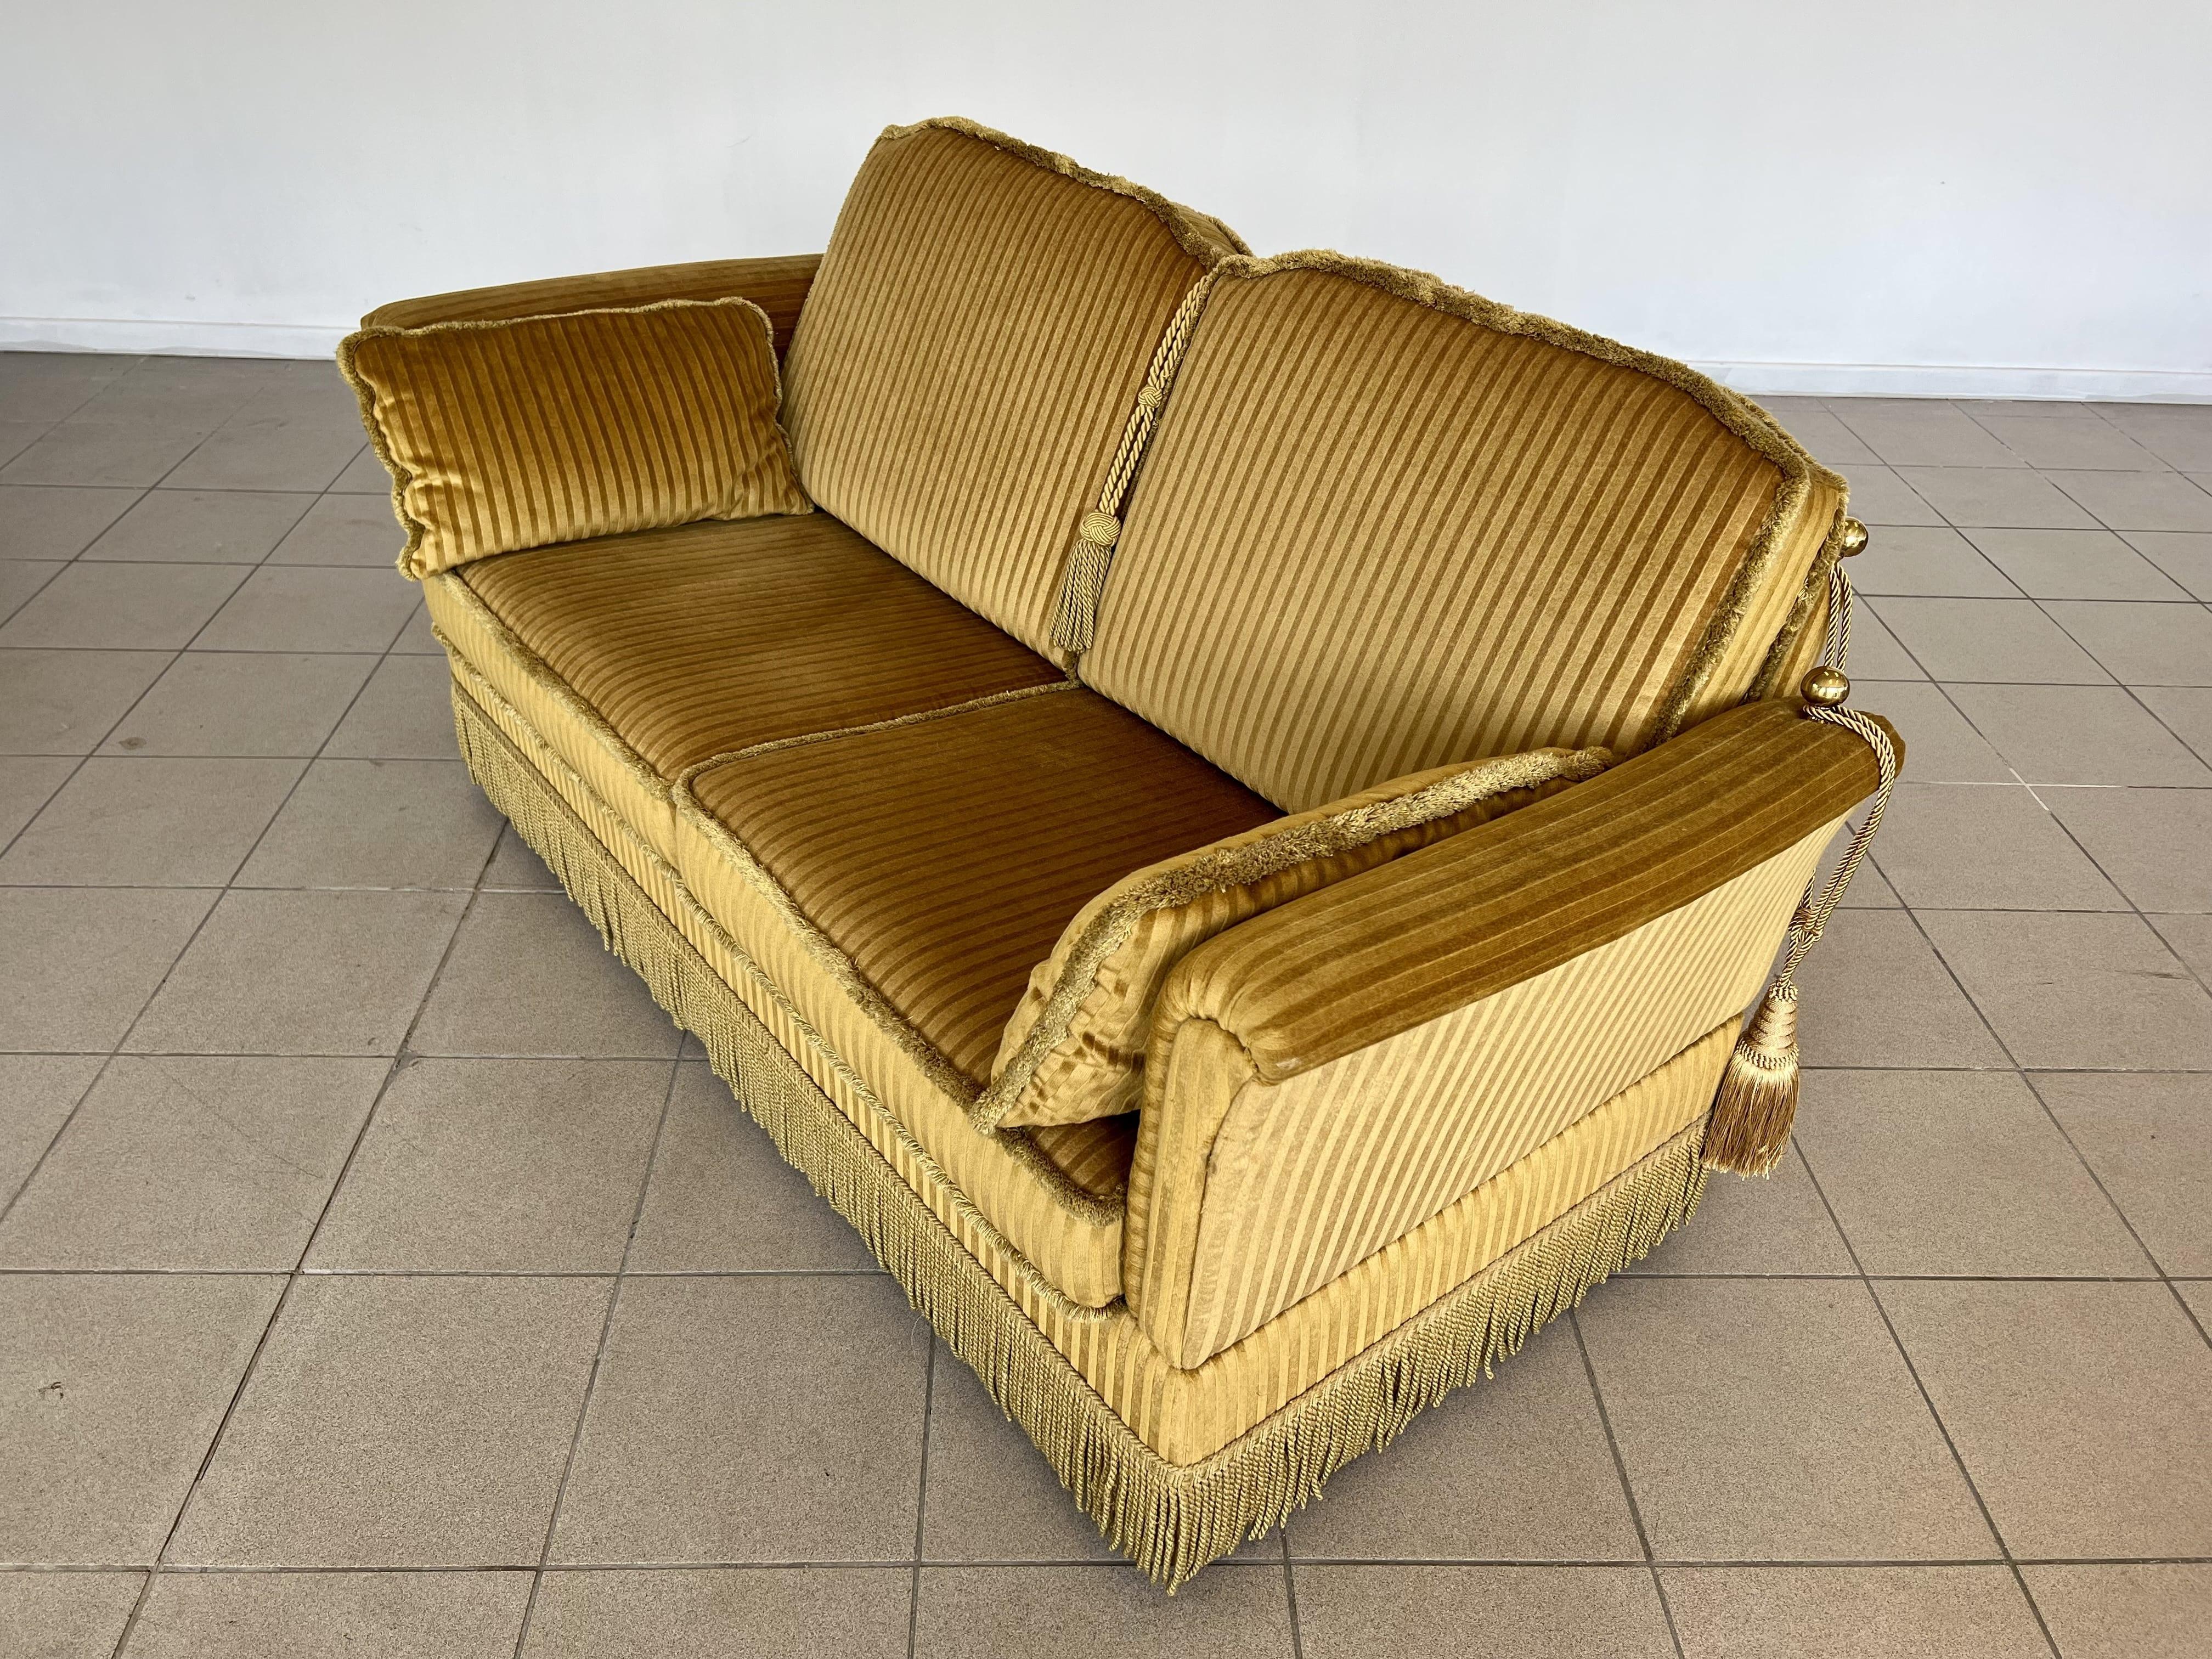 Vintage Art Deco Styled Adjustable Sofa Bed With Cushions and Fringes For Sale 2